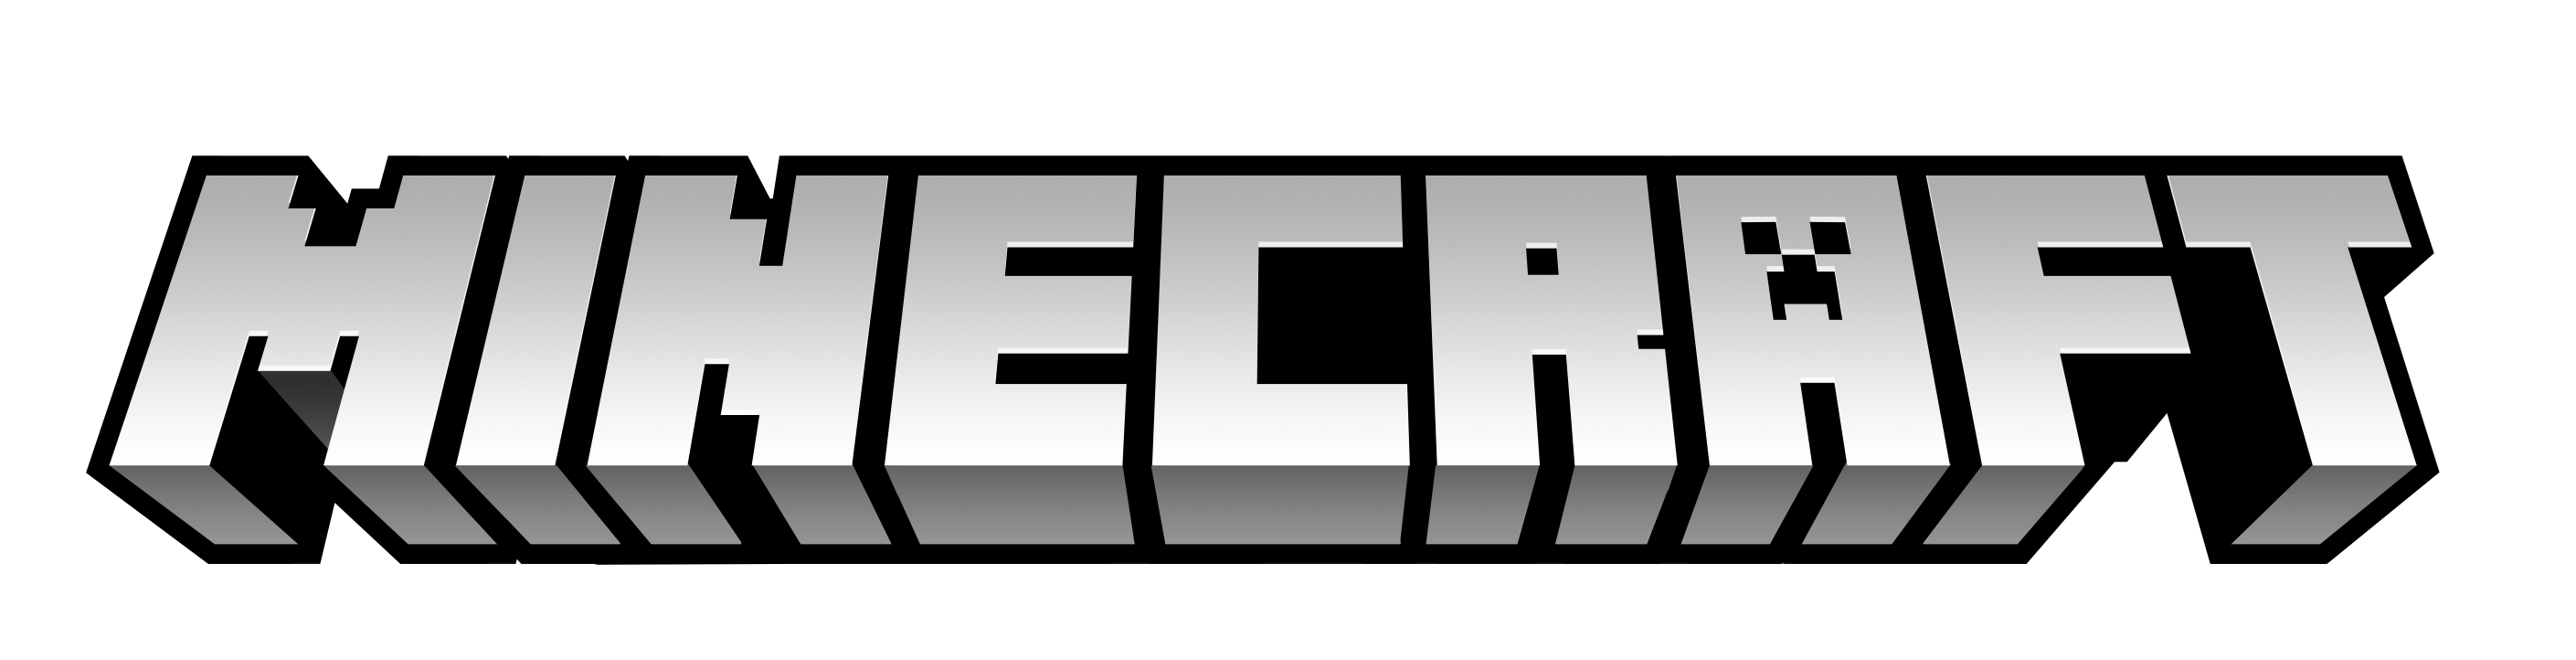 minecraft clipart black and white - photo #36